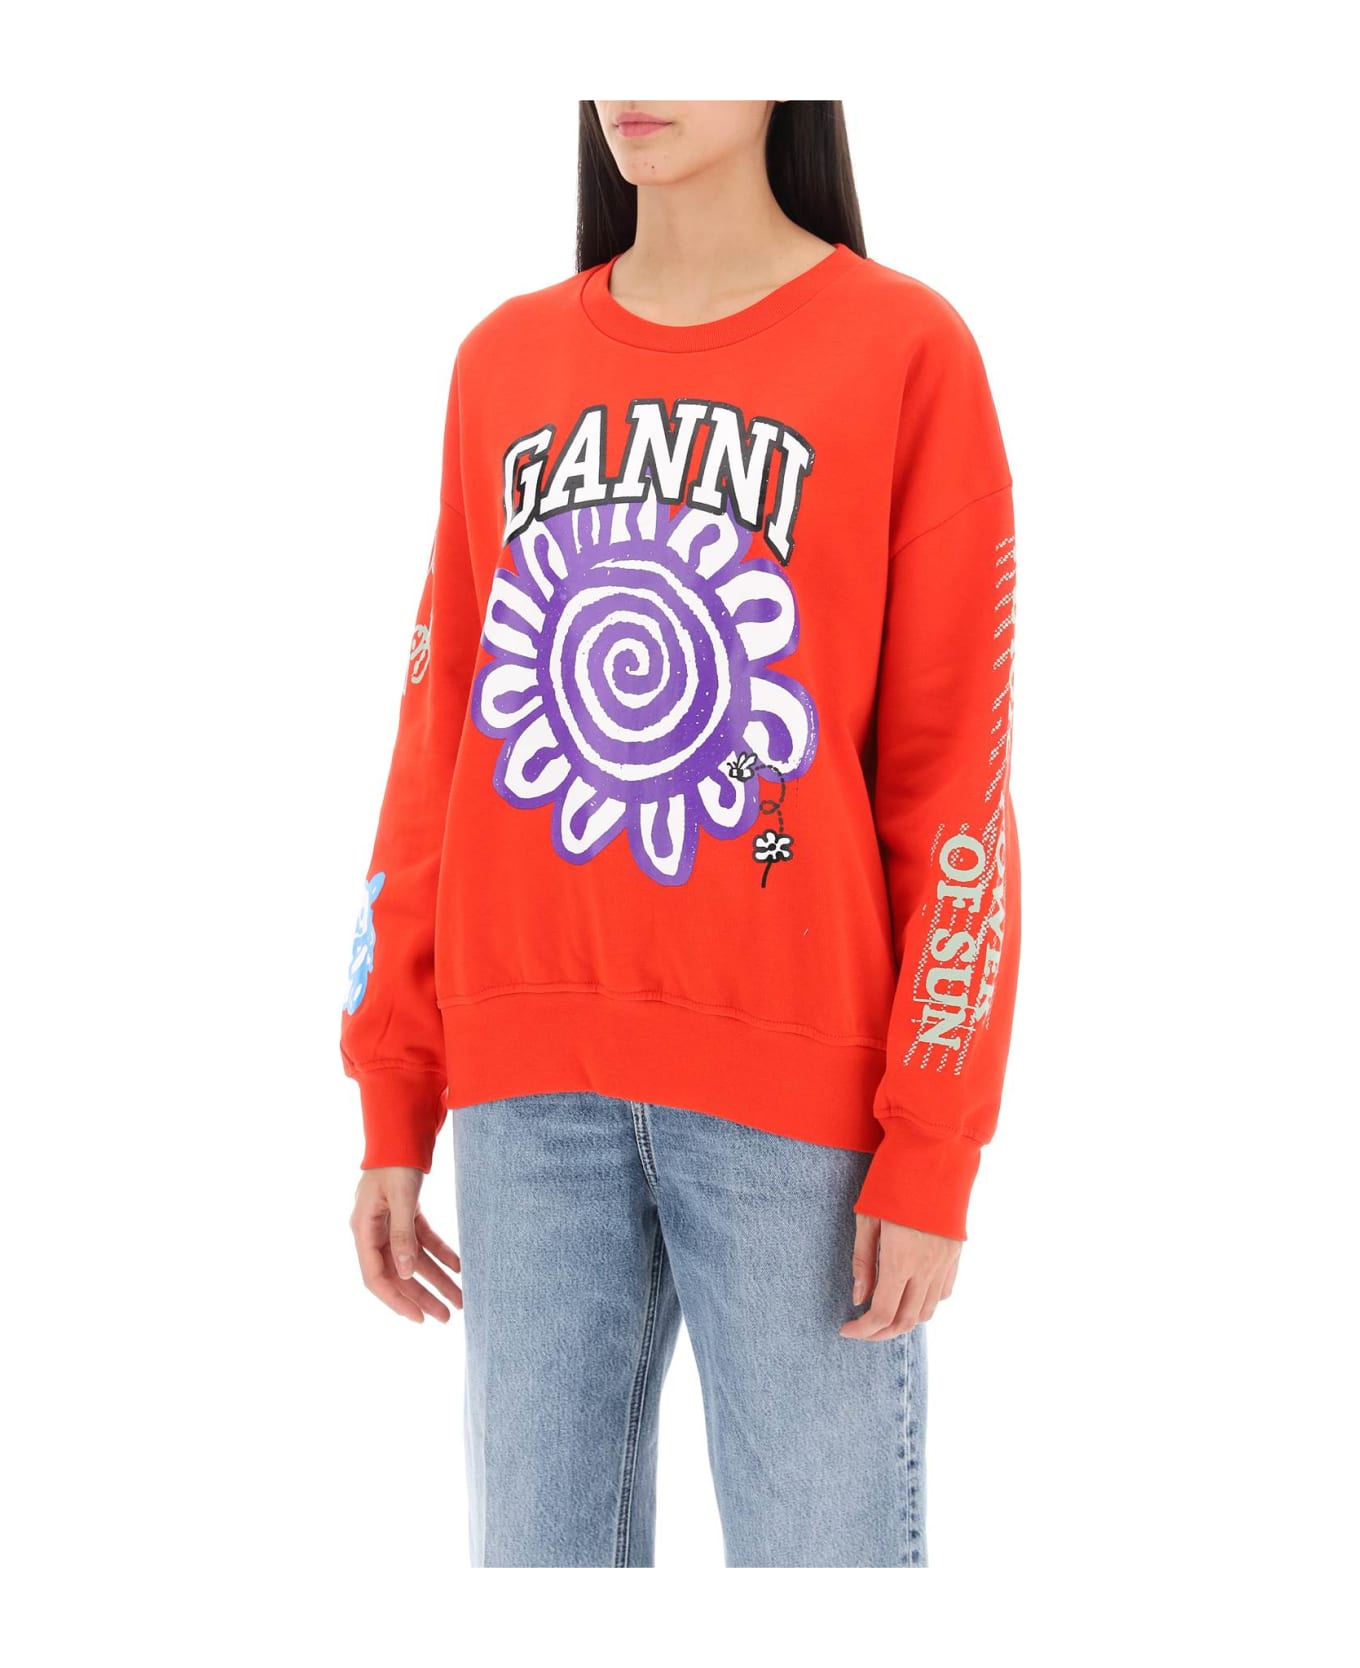 Ganni Sweatshirt With Graphic Prints - HIGH RISK RED (Red) フリース